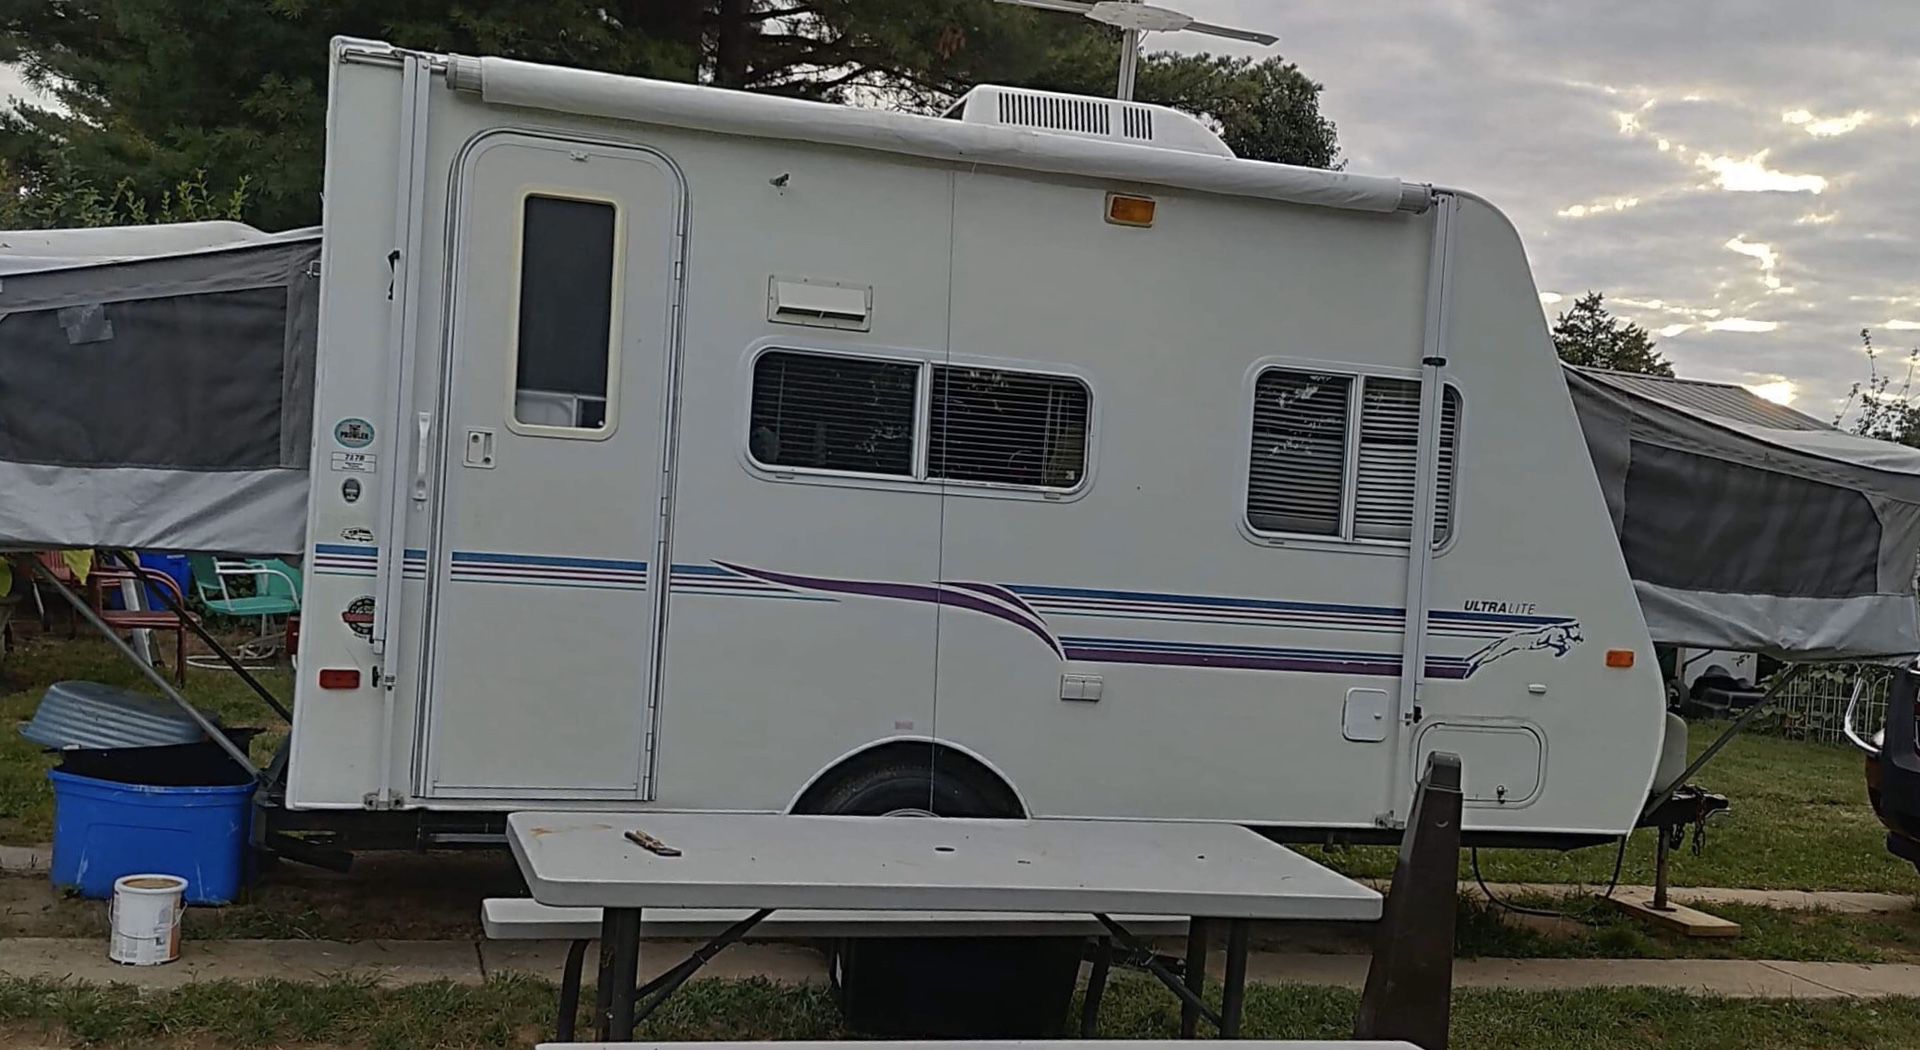 1999 prowler Rv camper with two fold outs great shape